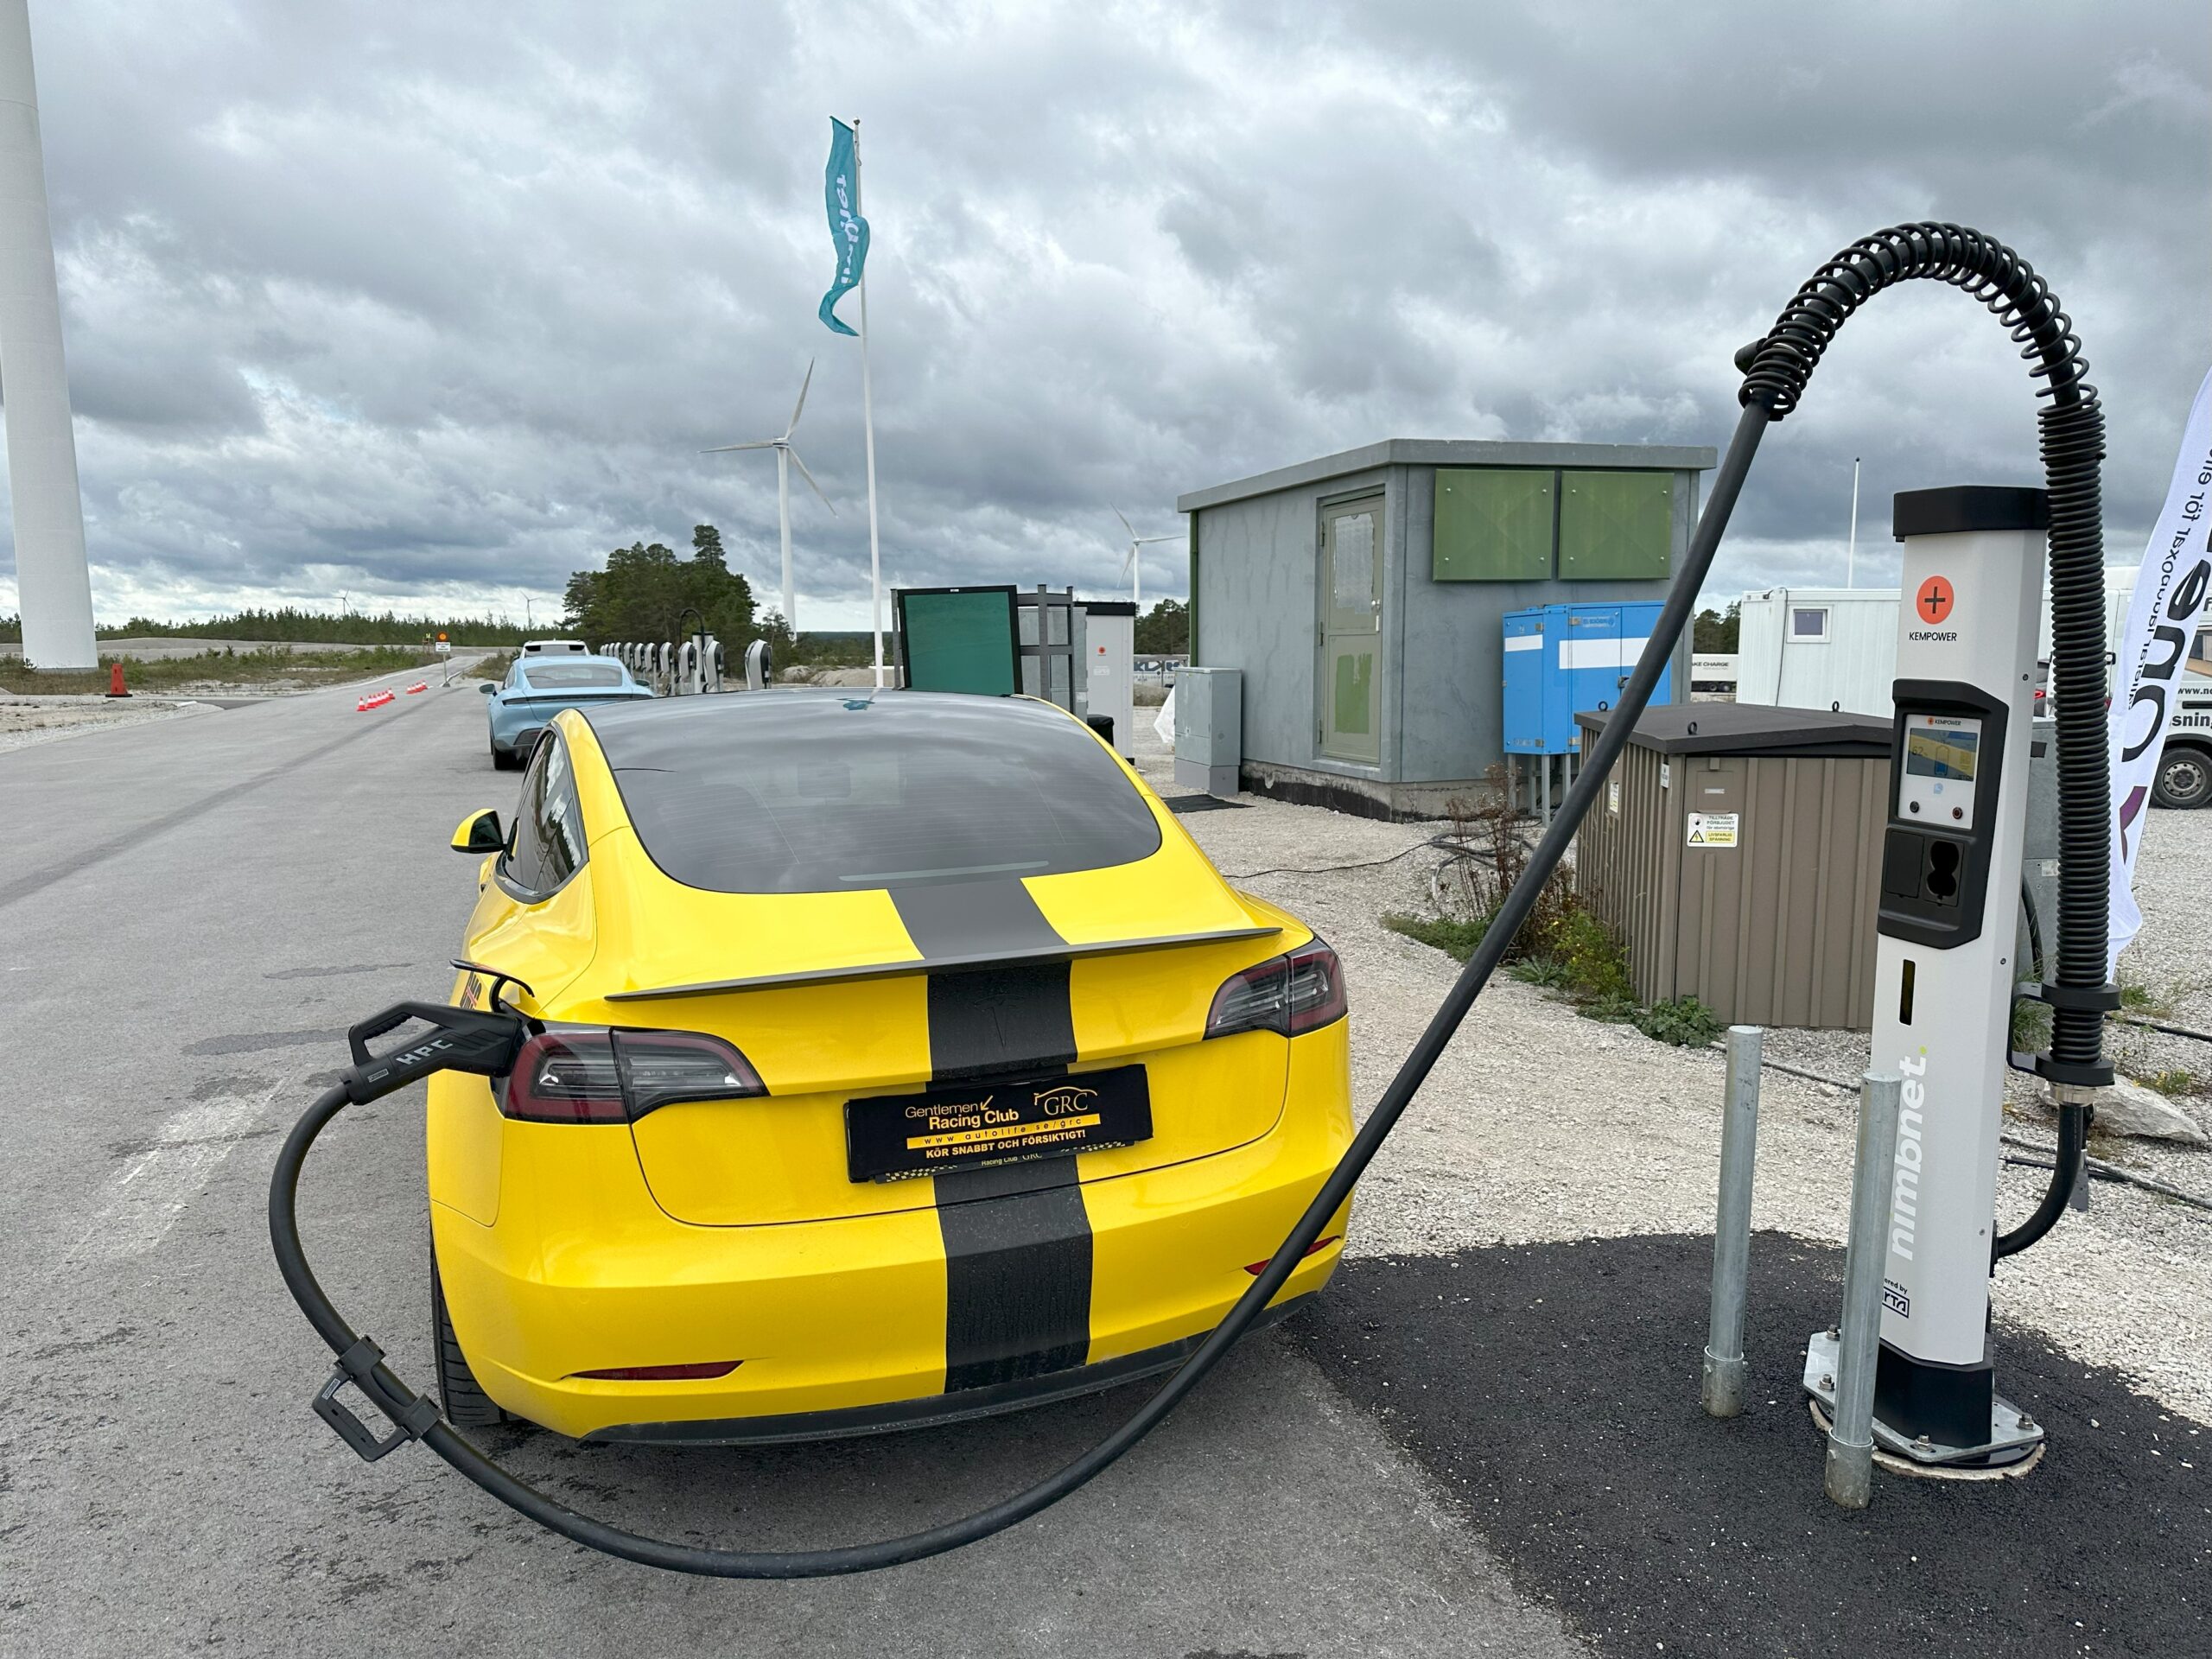 Nimbnet Launches Their First Electric Vehicle Fast Chargers at Gotland Ring